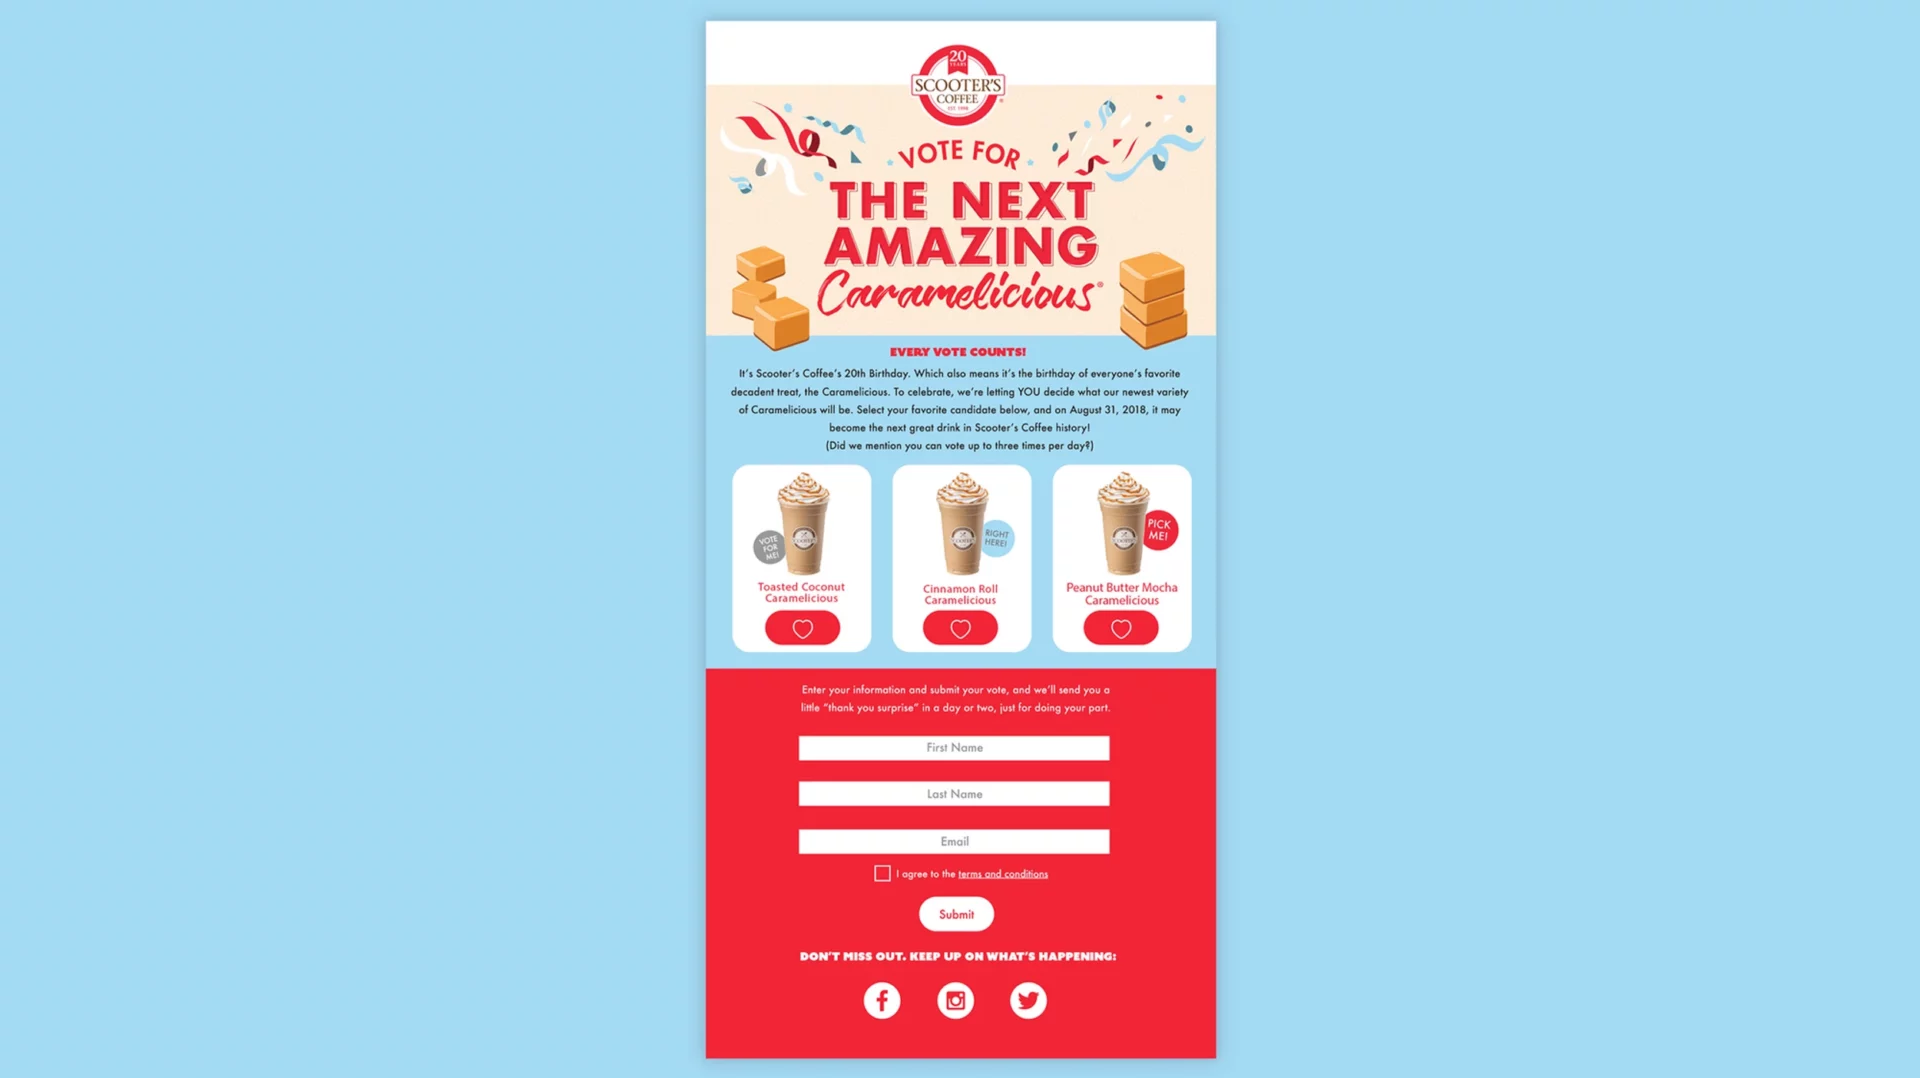 Engaging voting flyer design for a coffee creamer flavor contest with a catchy headline, colorful icons, and clear call-to-action buttons.